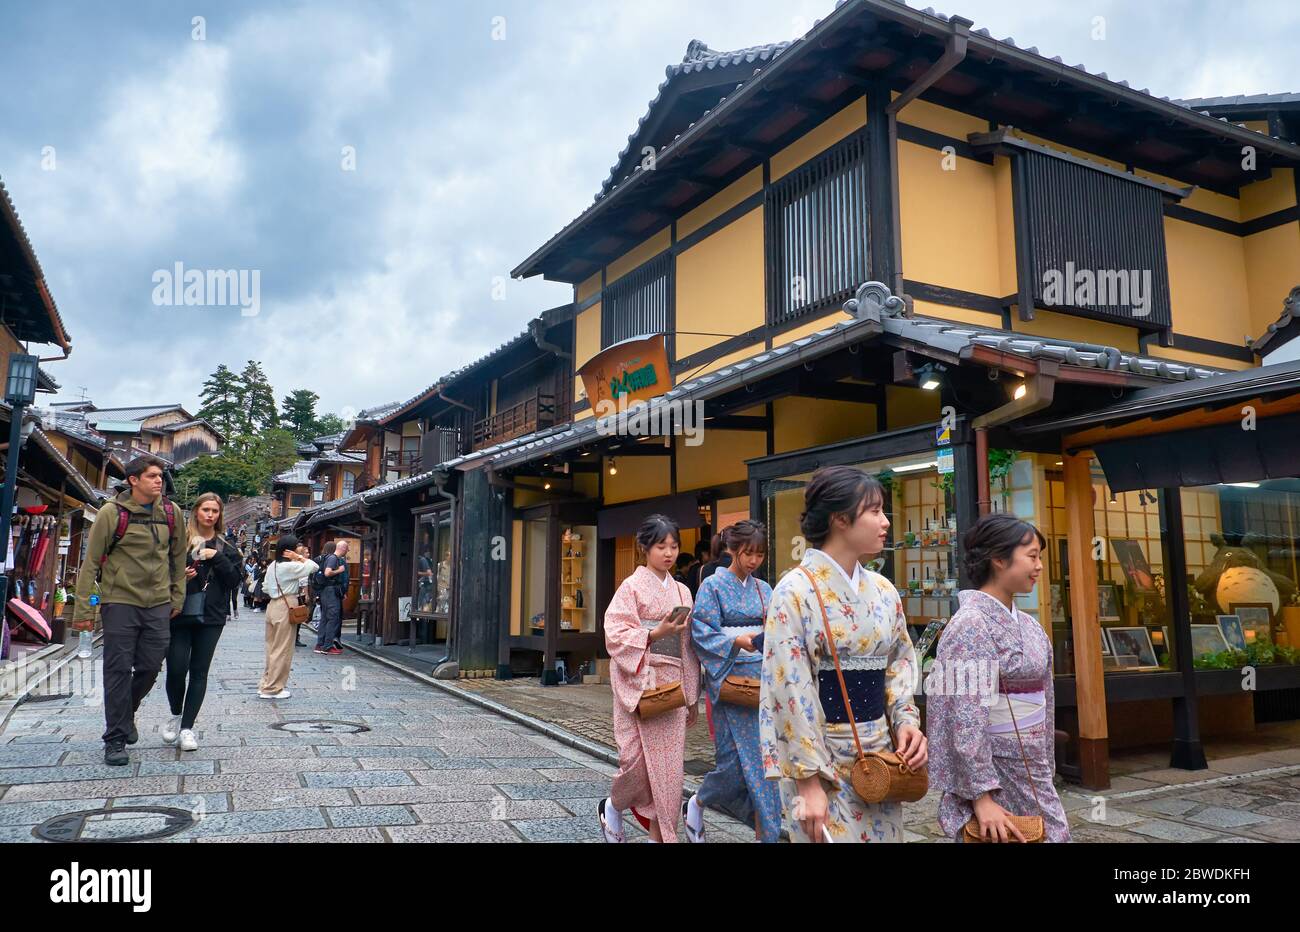 KYOTO, JAPAN - OCTOBER 18, 2019:  The crowded with people Sannenzaka street full of cafe and souvenir shops near Kiyomizu-dera temple. Kyoto. Japan Stock Photo